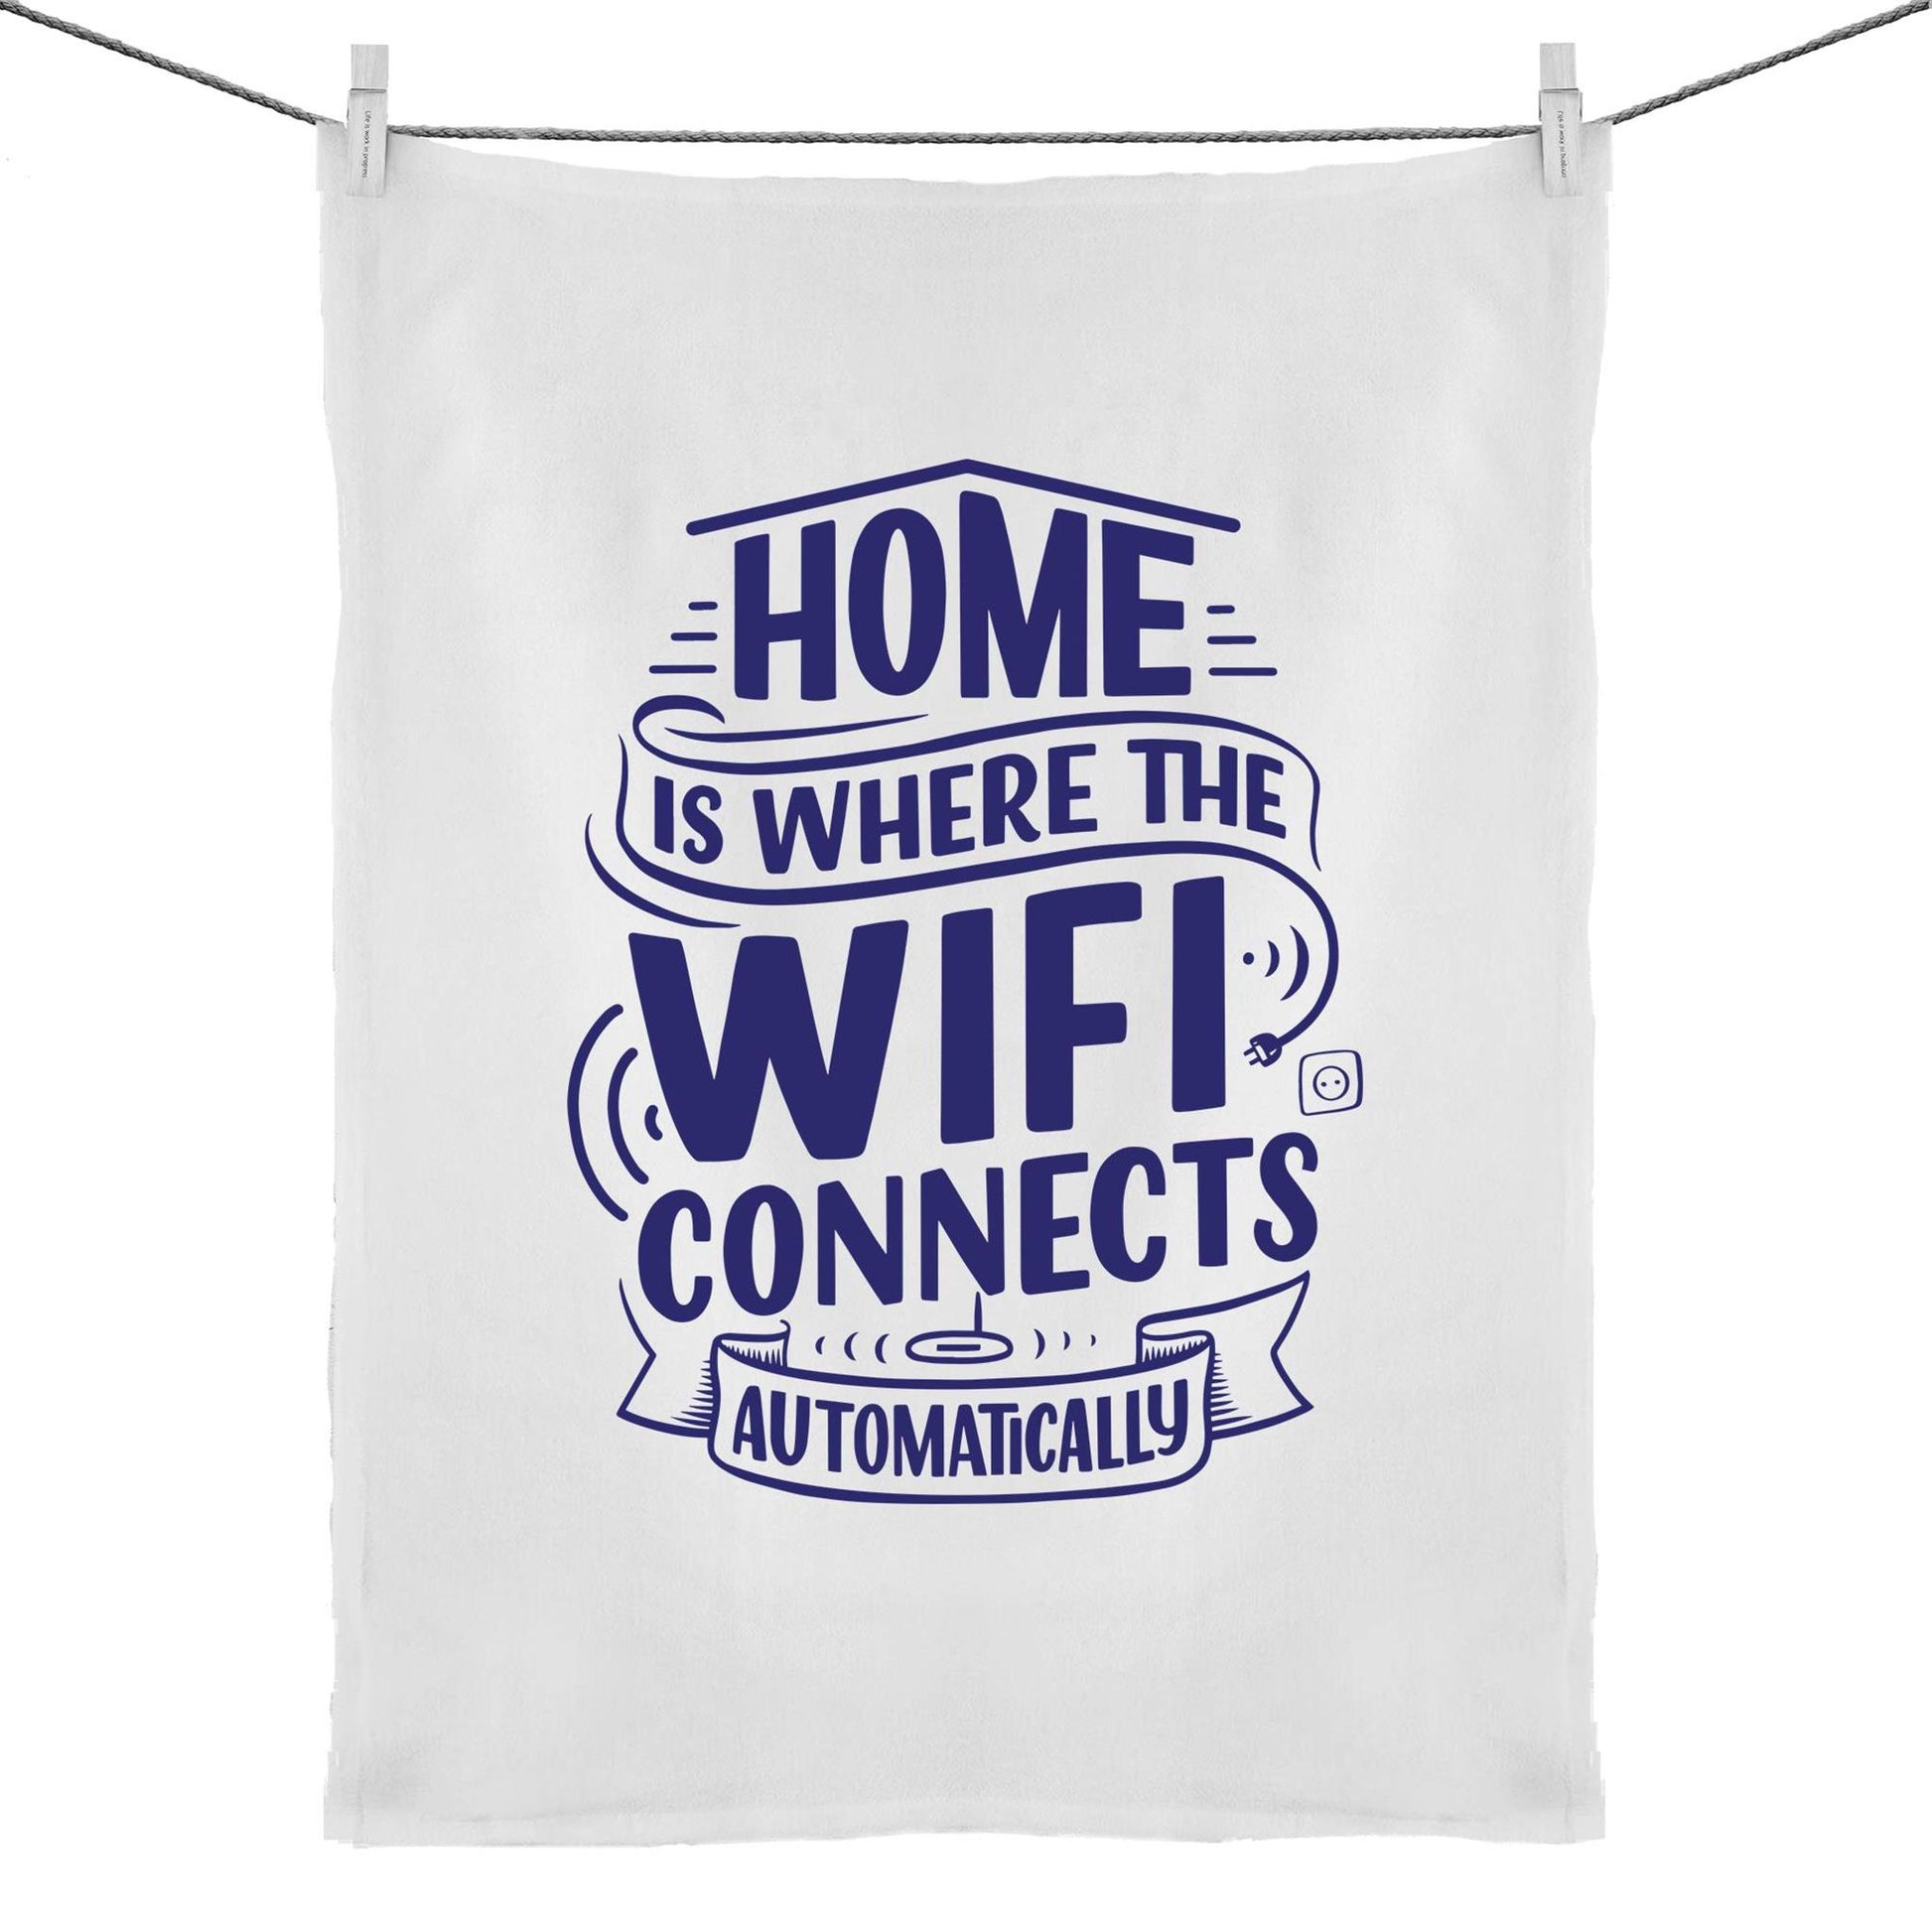 Home Is Where The WIFI Connects Automatically - 50% Linen 50% Cotton Tea Towel Default Title Tea Towel